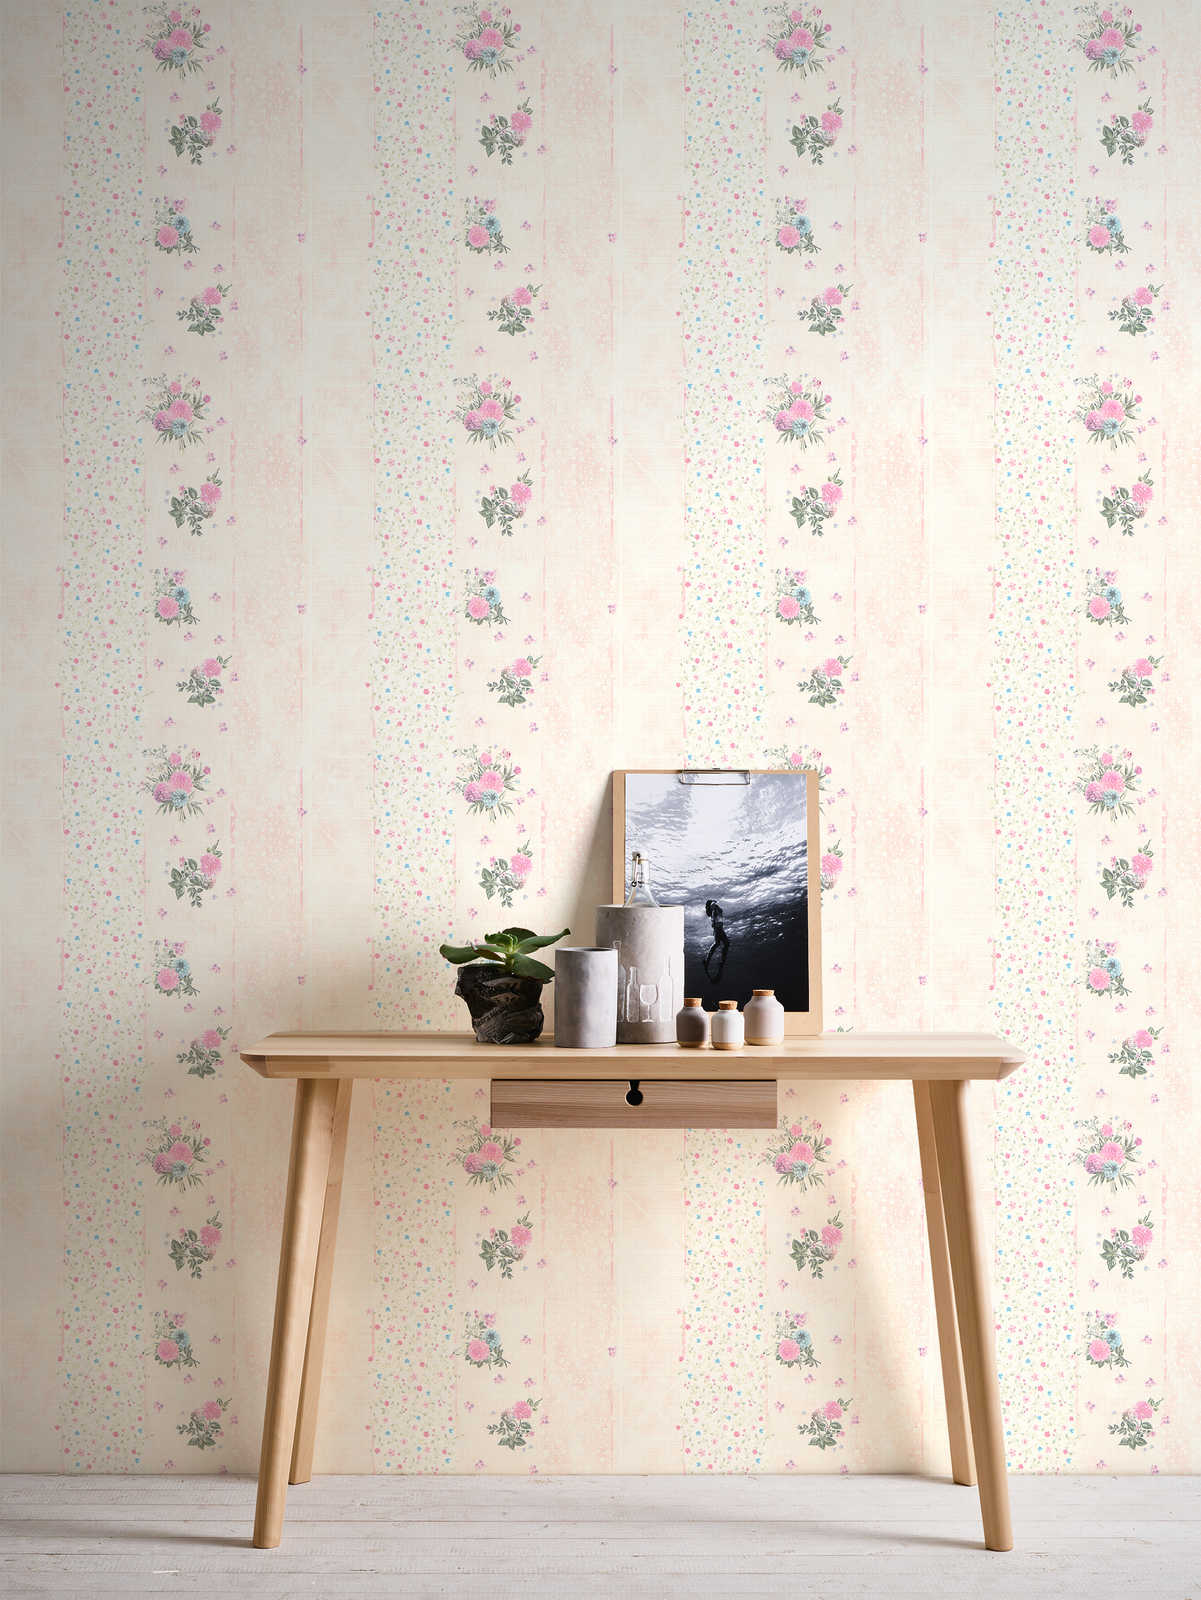             Flowers wallpaper with striped design - colourful, pink
        